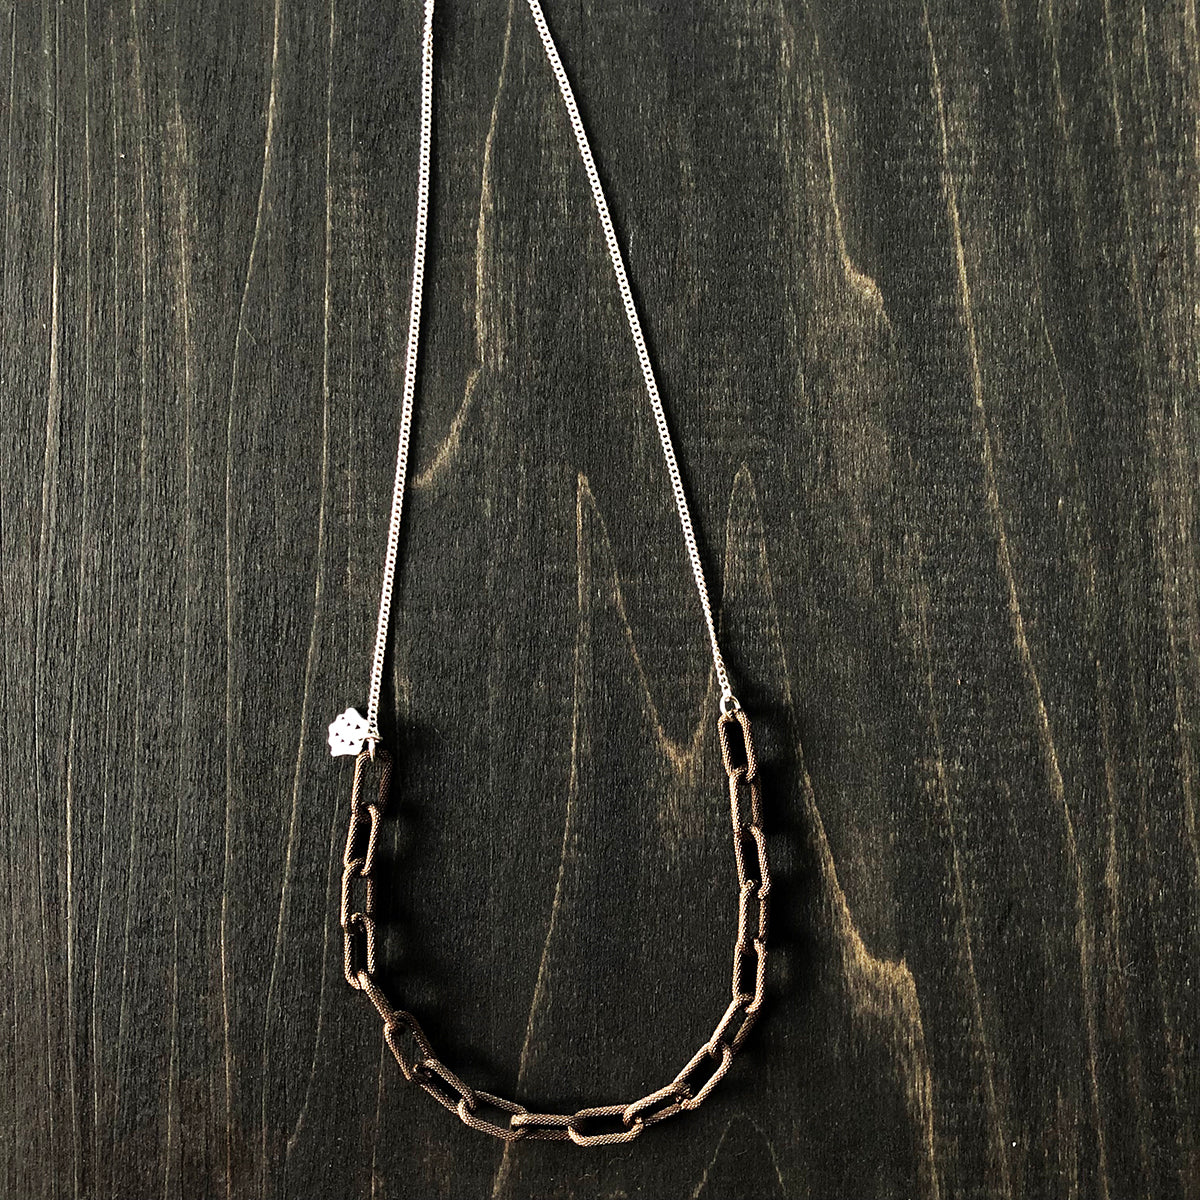 Copper and Sterling Silver Chain Necklace to Layer - Jester Swink